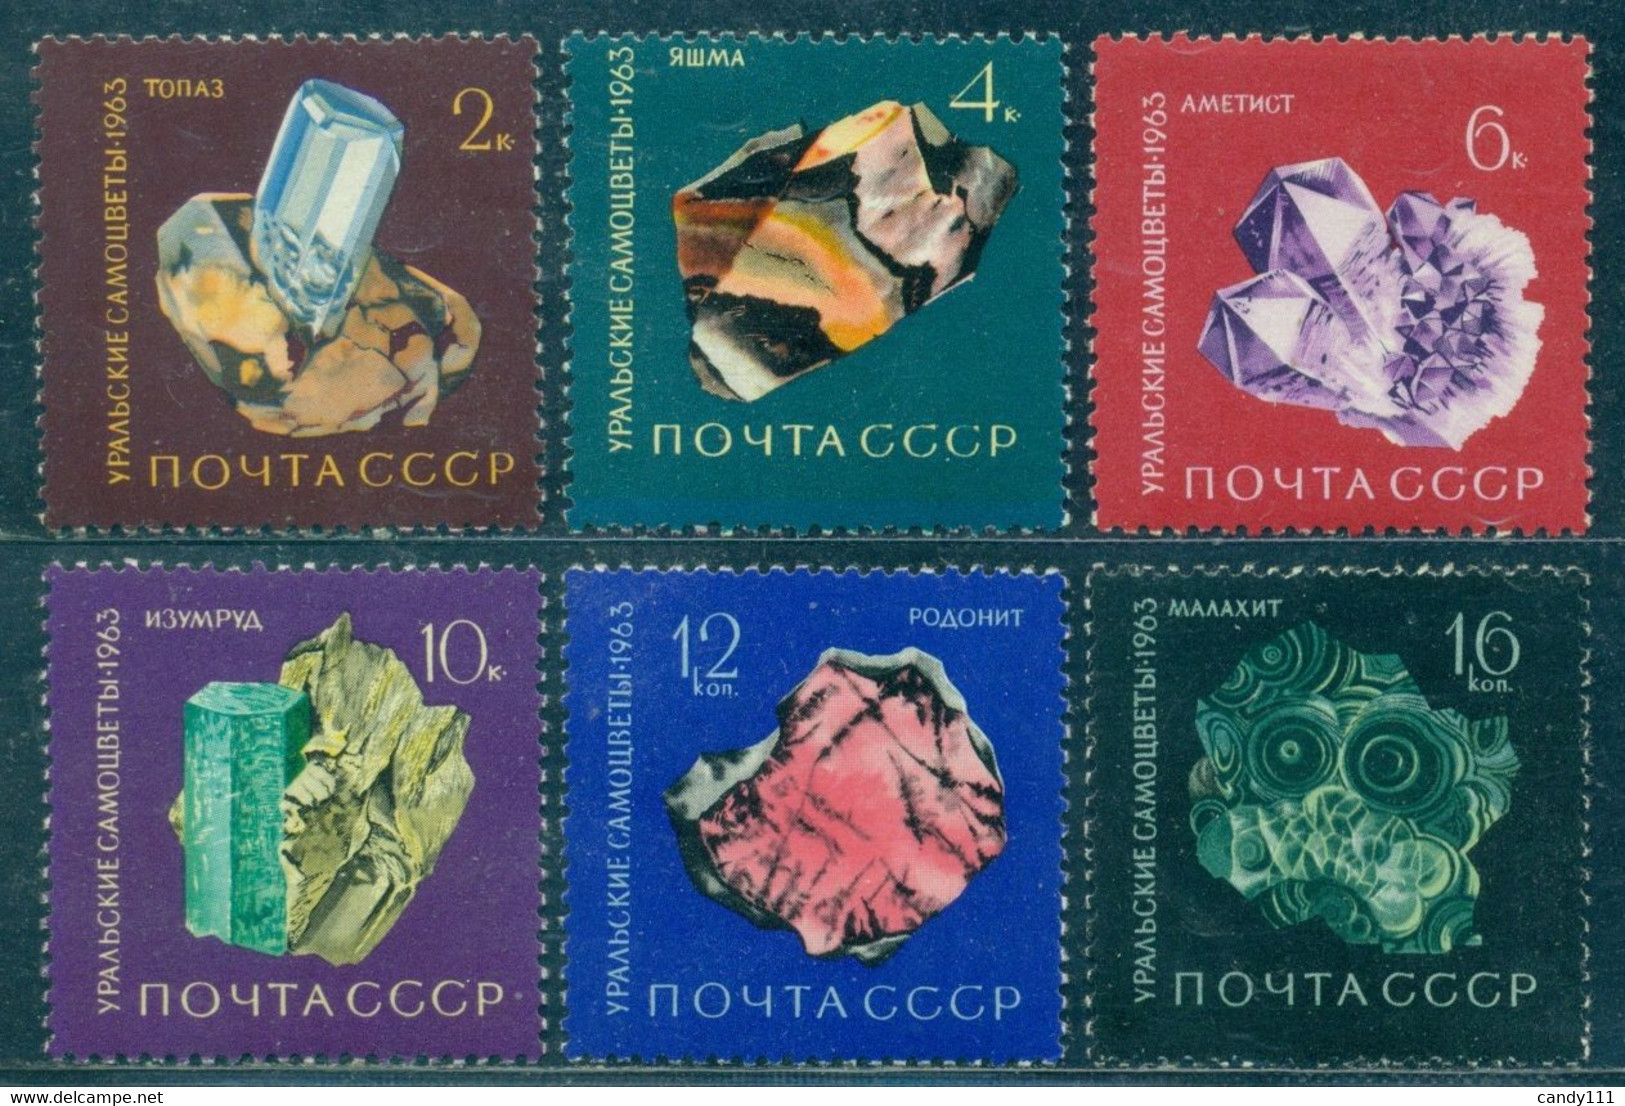 1963 Minerals Of The Ural Mountains, Emeral,topa,MineralienRussia, 2846,MNH - Minéraux